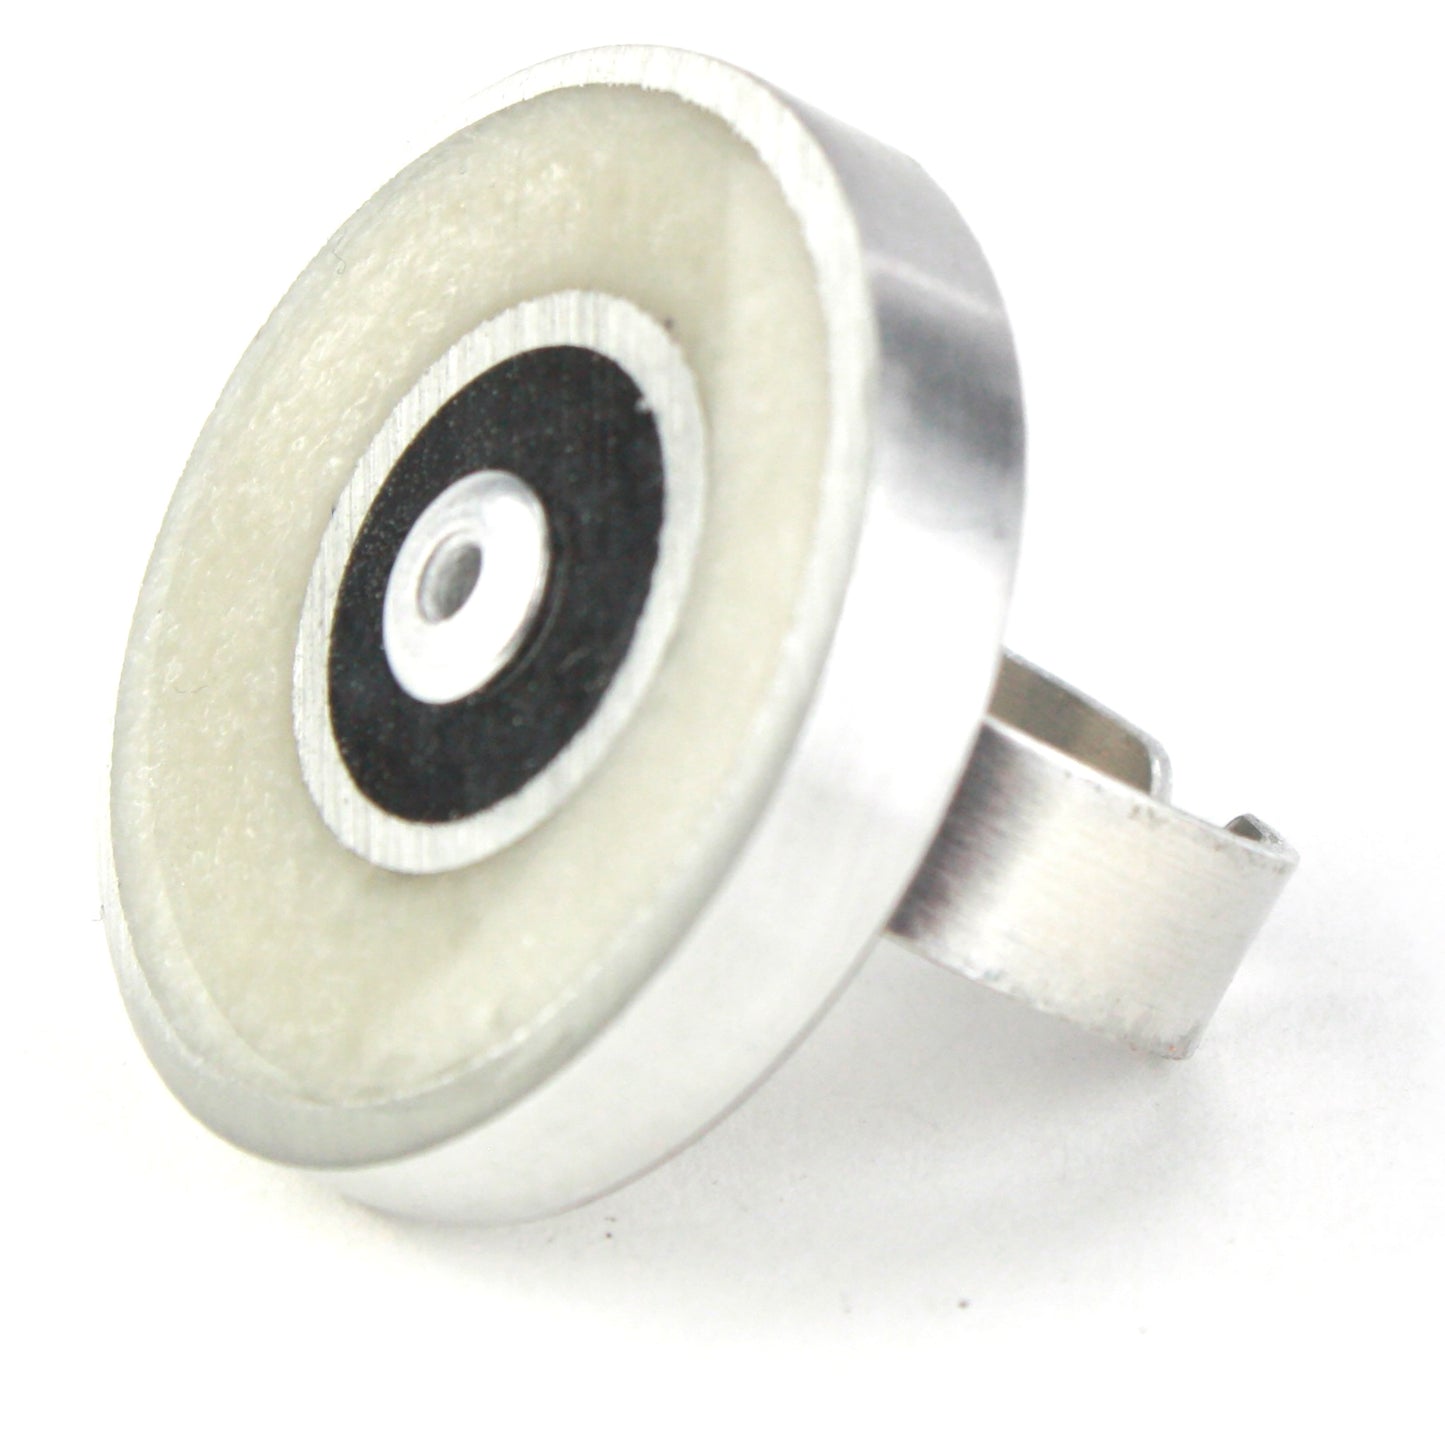 Resinique double circle ring - White and black